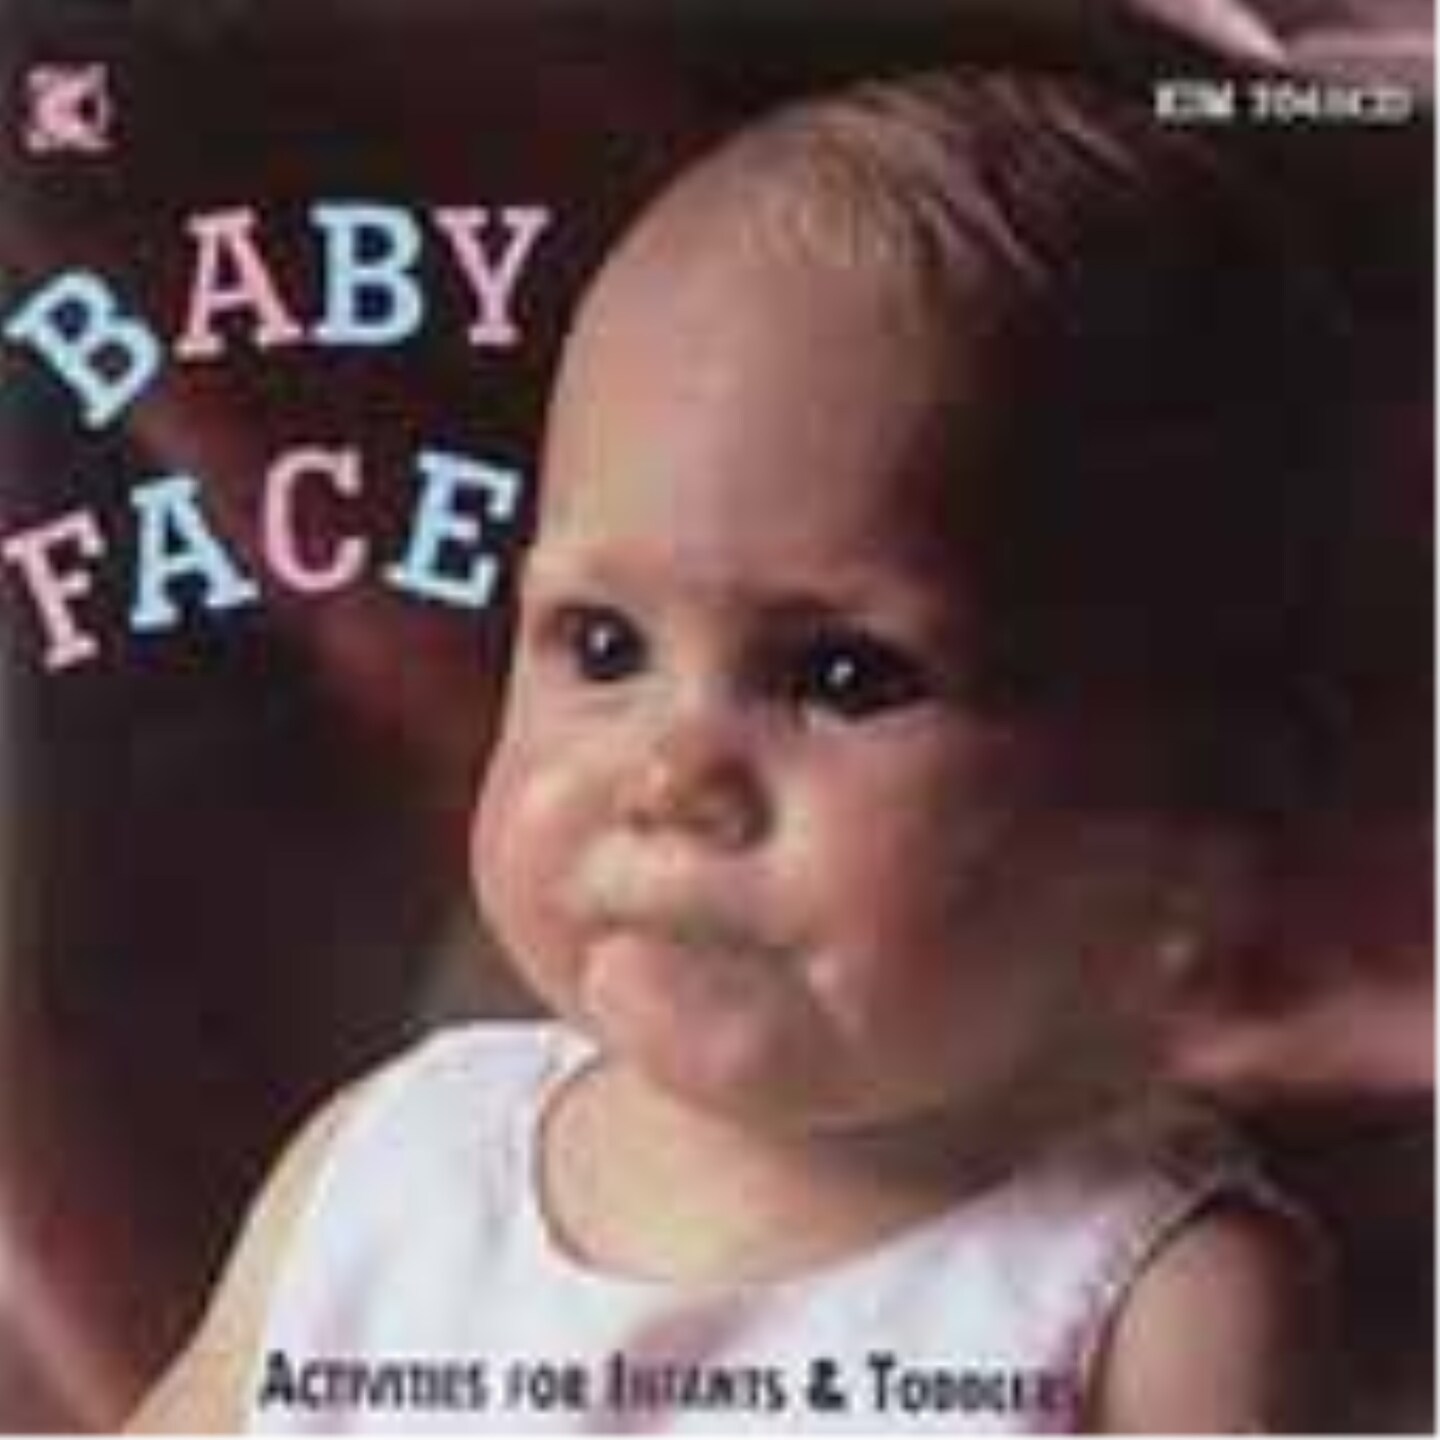 Baby Face Educational CD